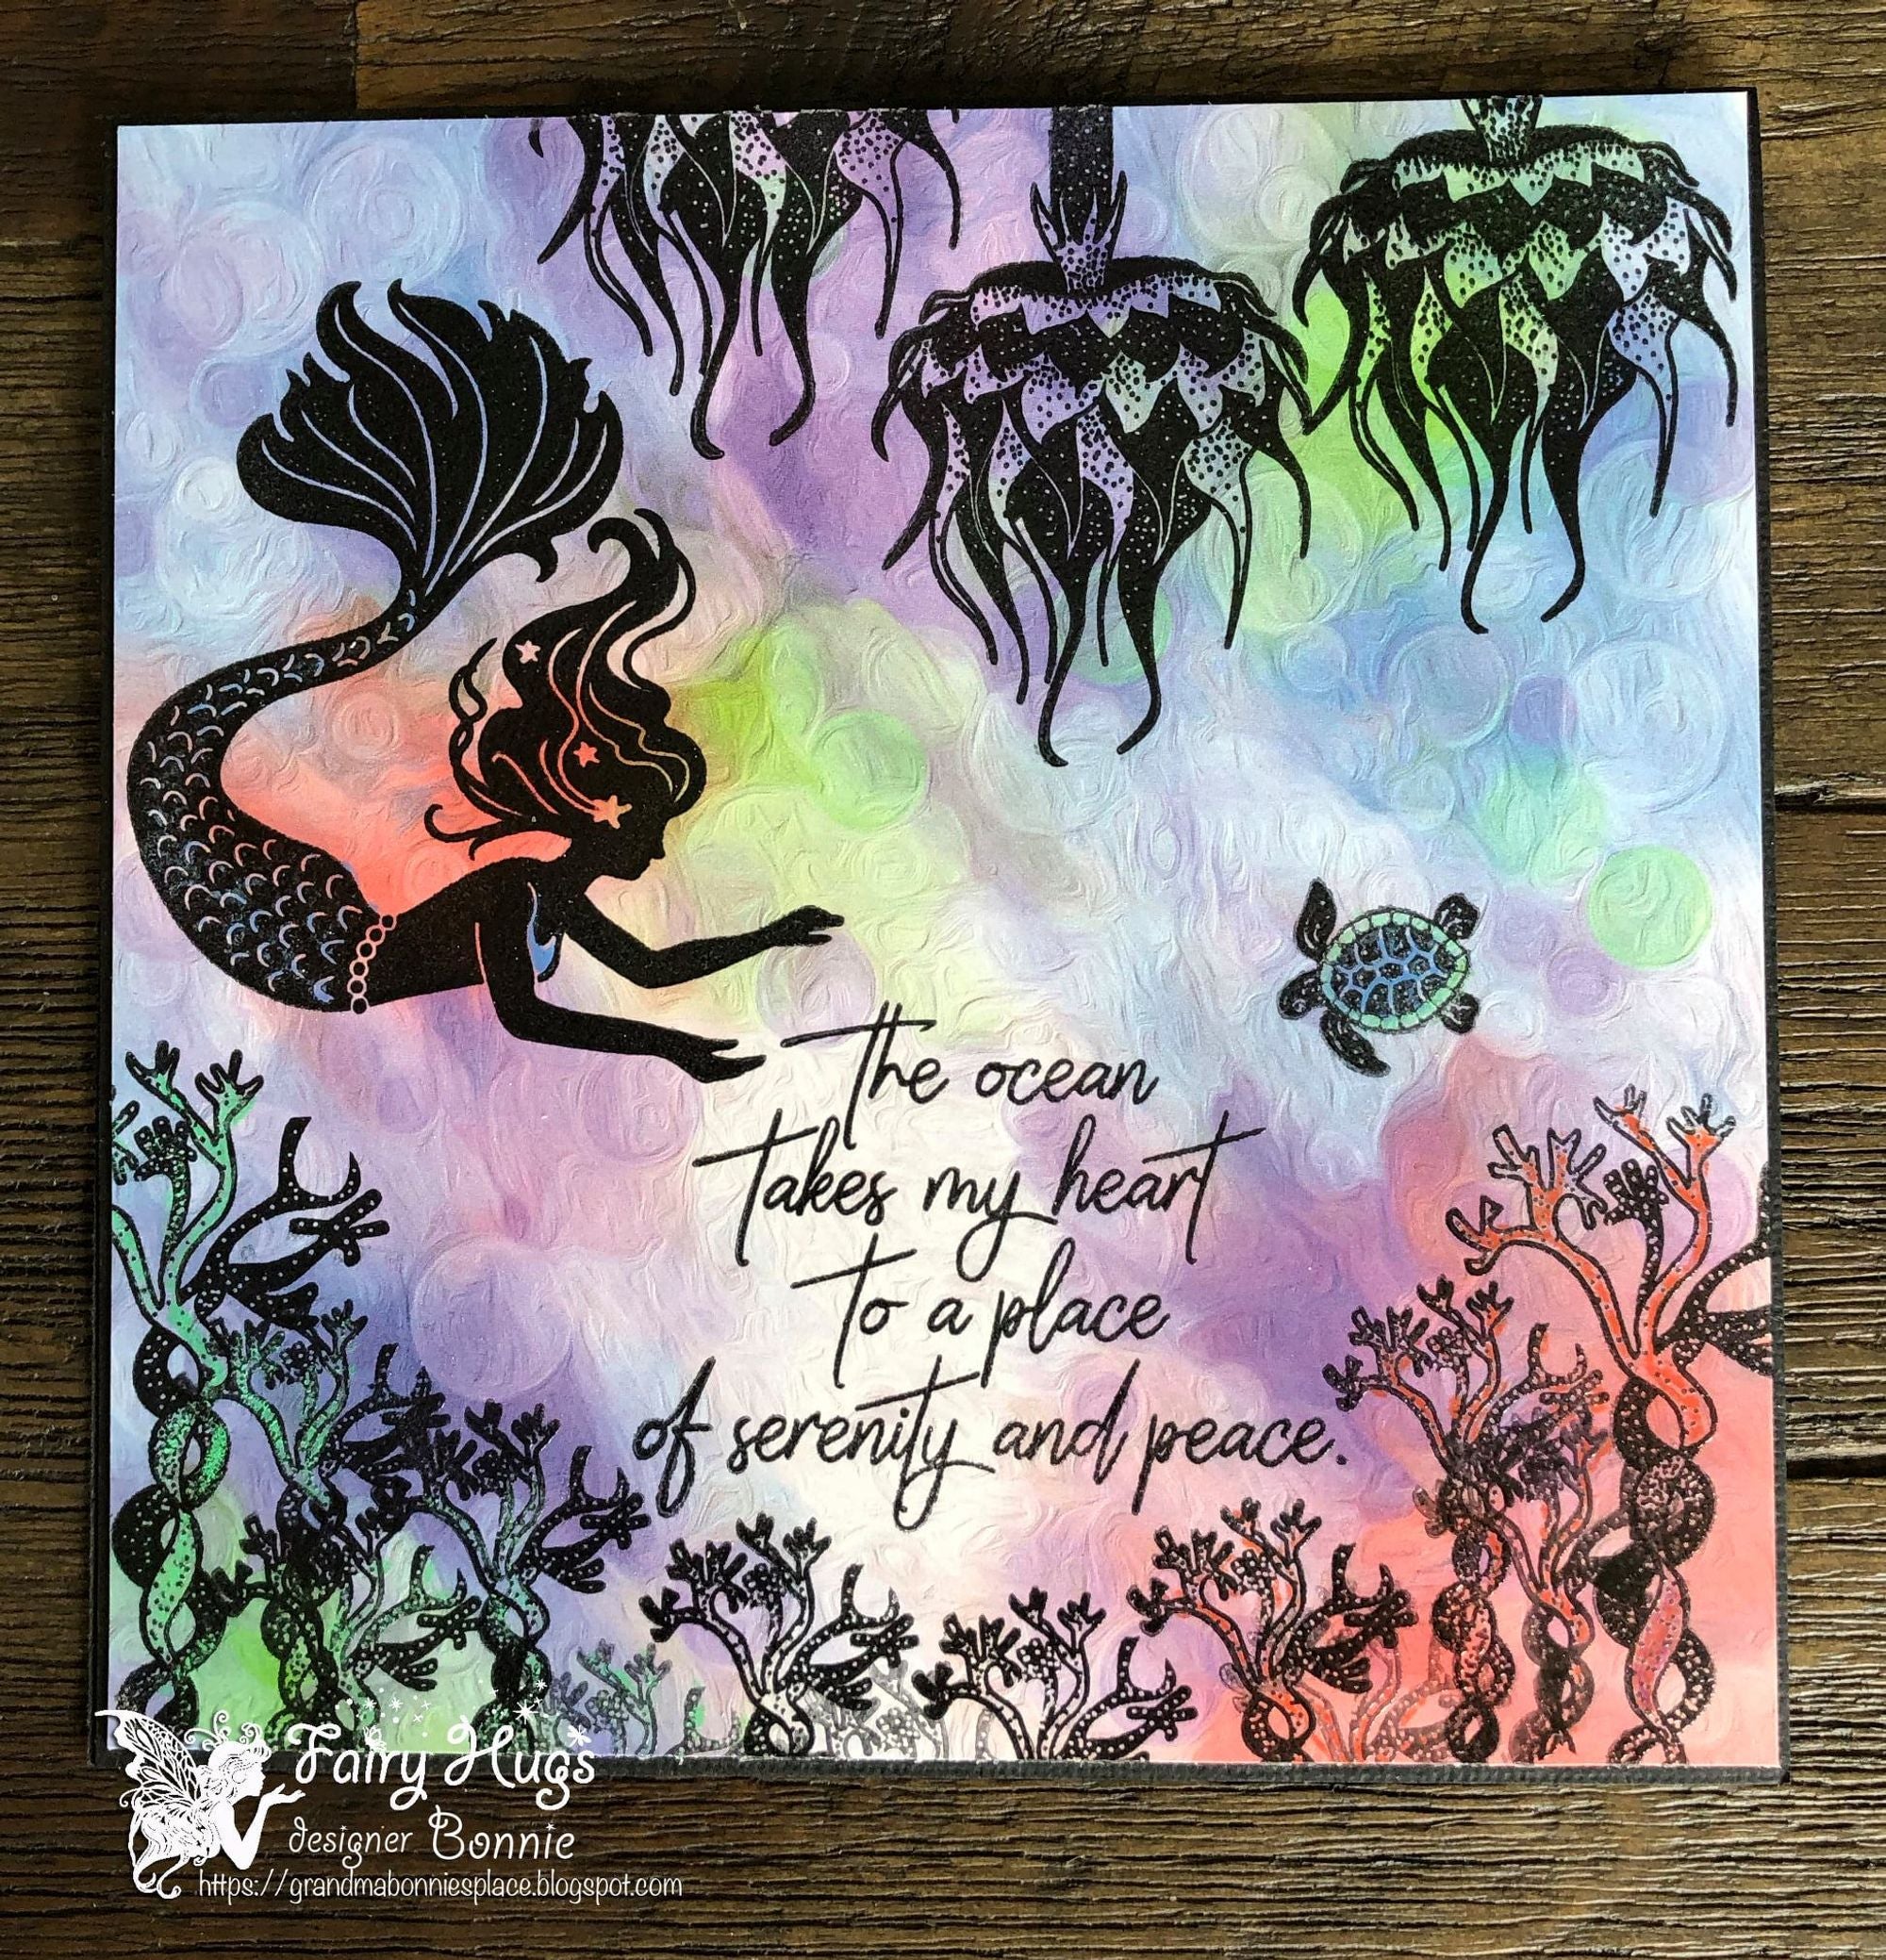 Fairy Hugs - Fairy-Scapes - 6" x 6" - Sea Diving